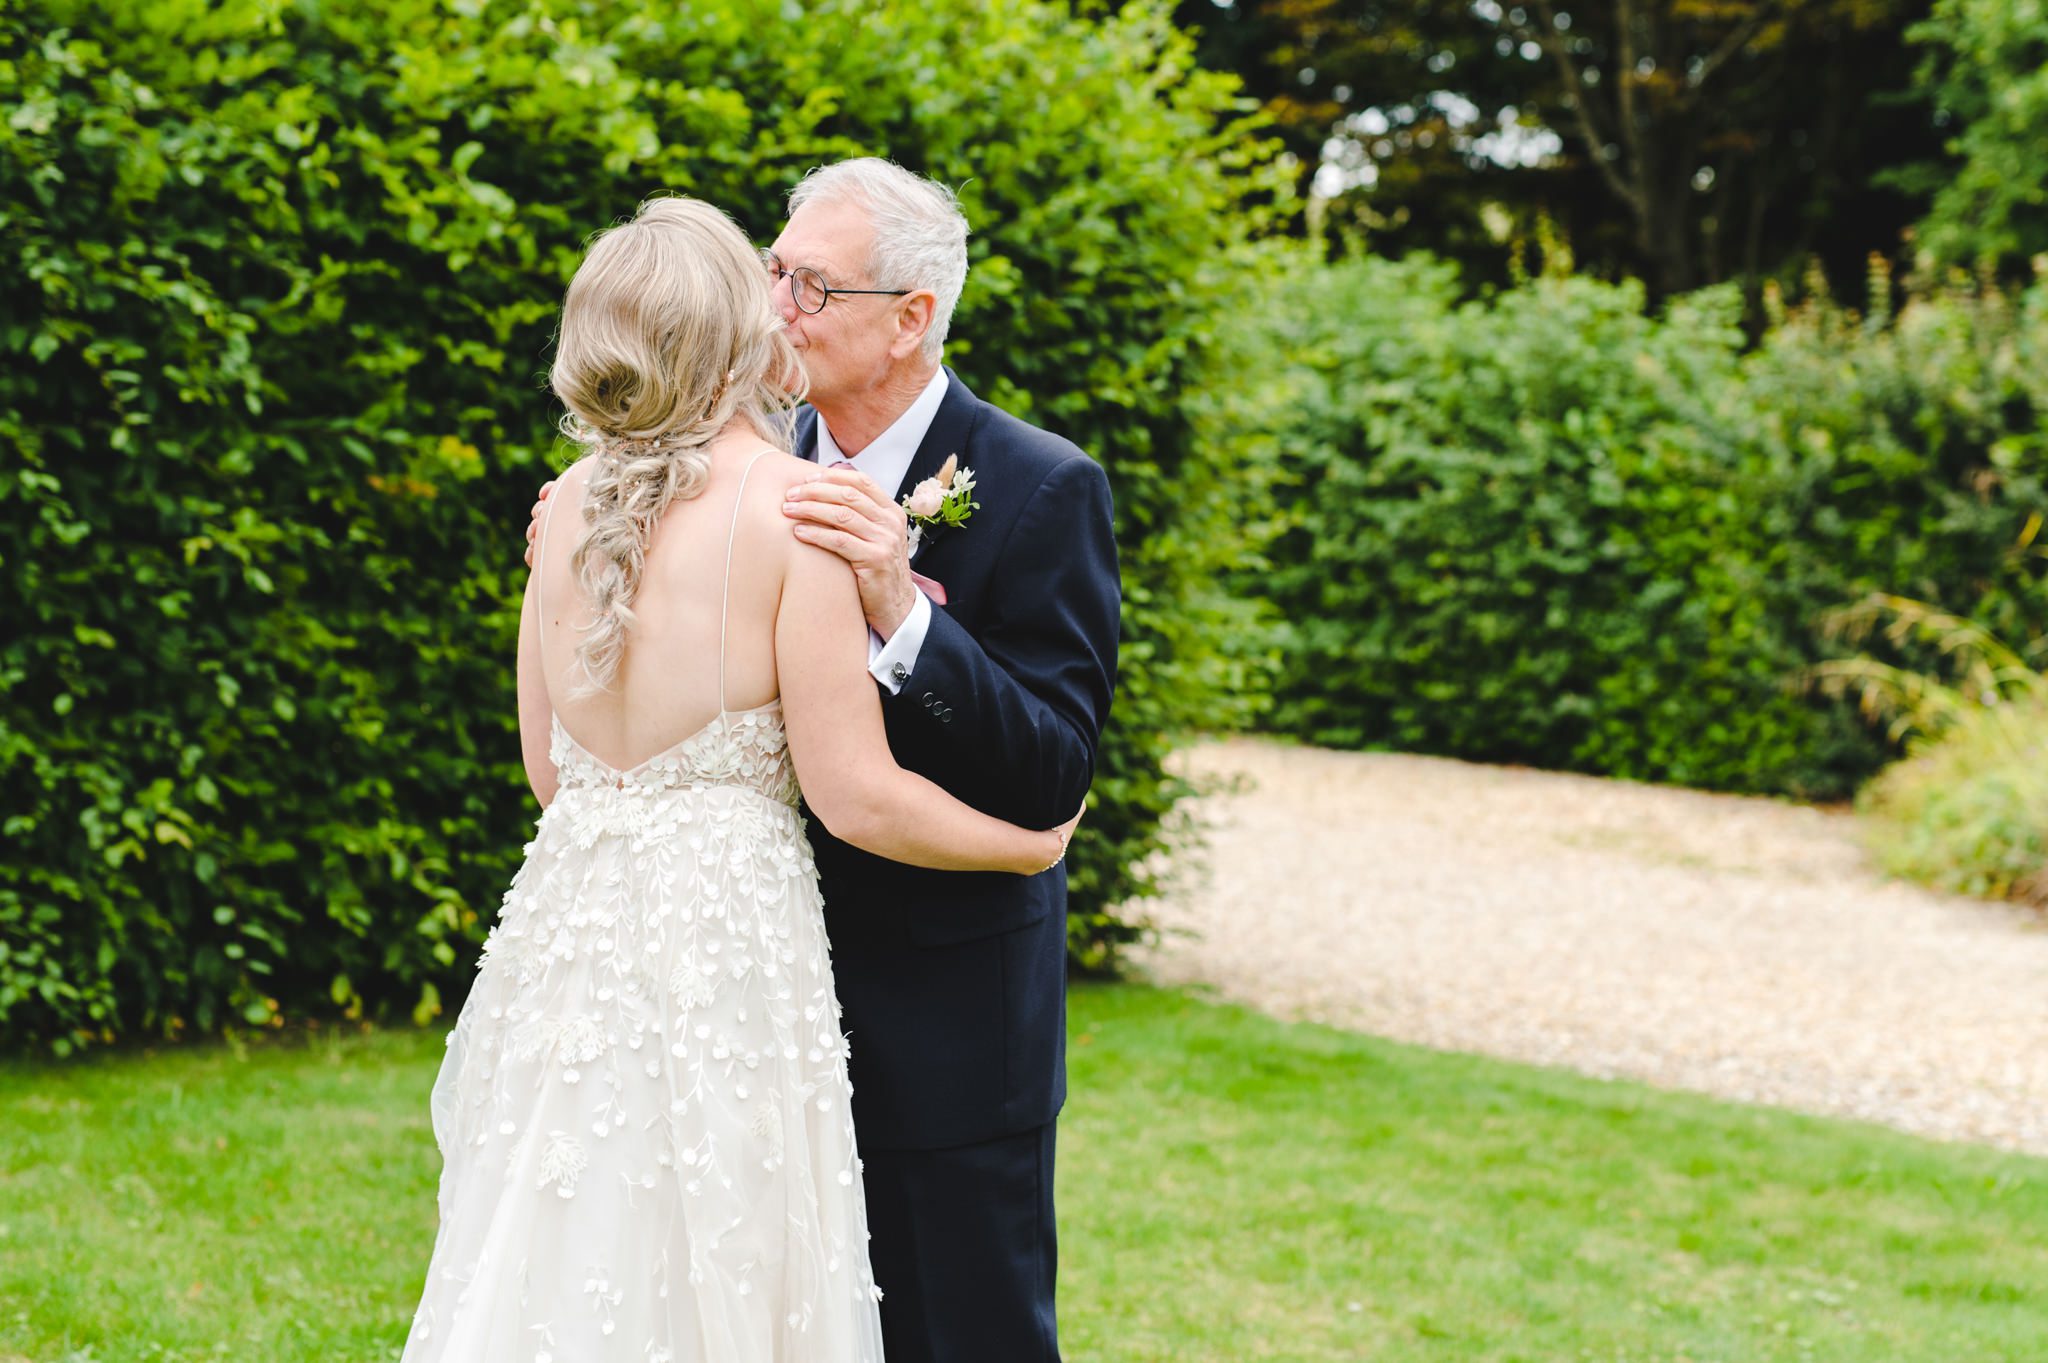 A bride's father kissing his daughter